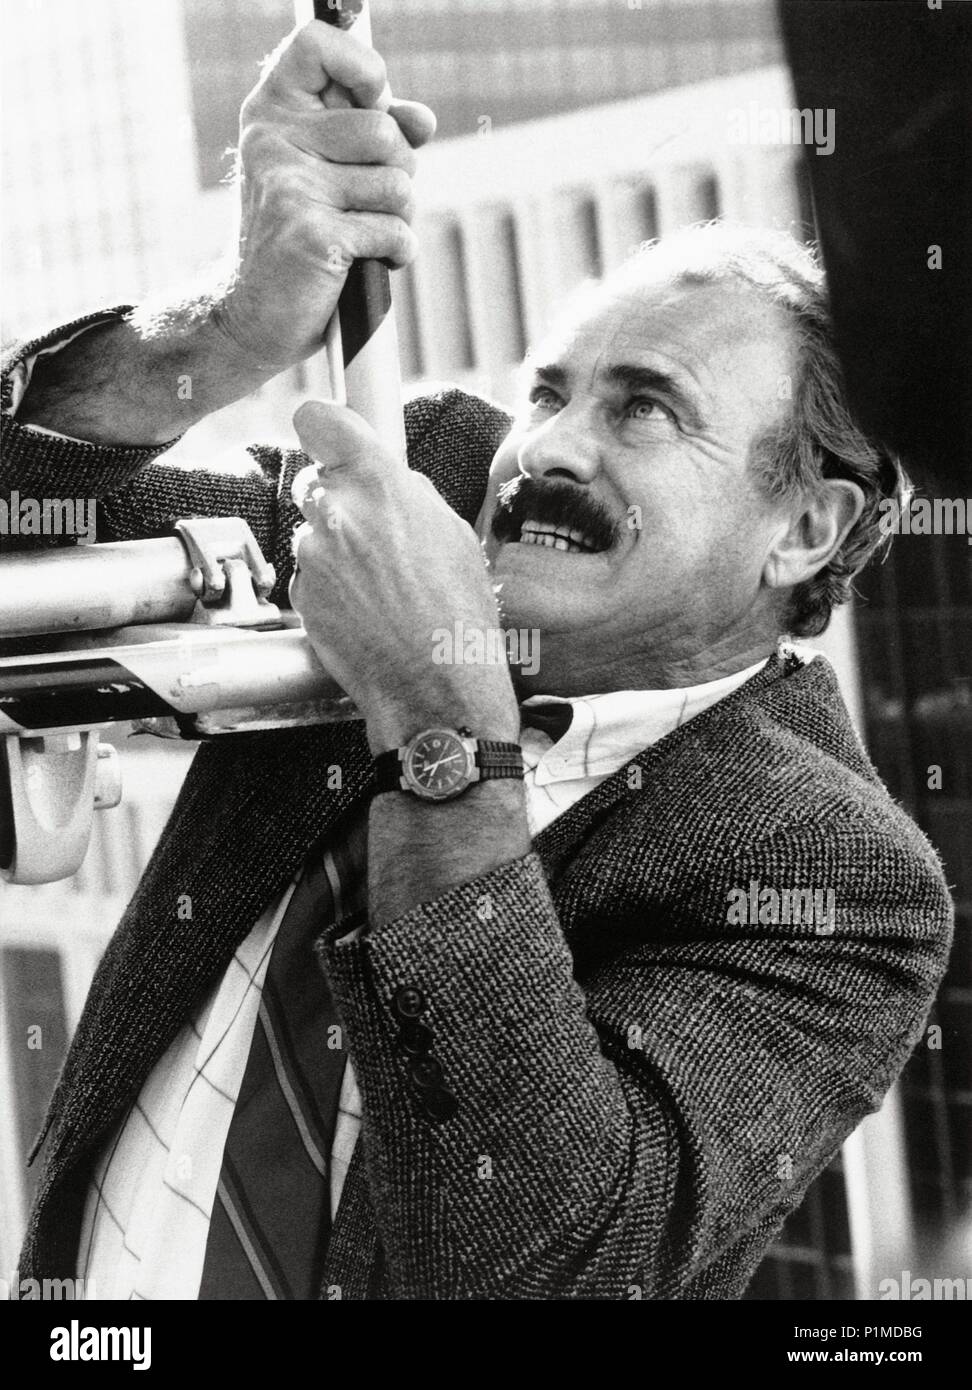 Original Film Title: SHORT TIME.  English Title: SHORT TIME.  Film Director: GREGG CHAMPION.  Year: 1990.  Stars: DABNEY COLEMAN. Credit: TOUCHSTONE PICTURES / Album Stock Photo